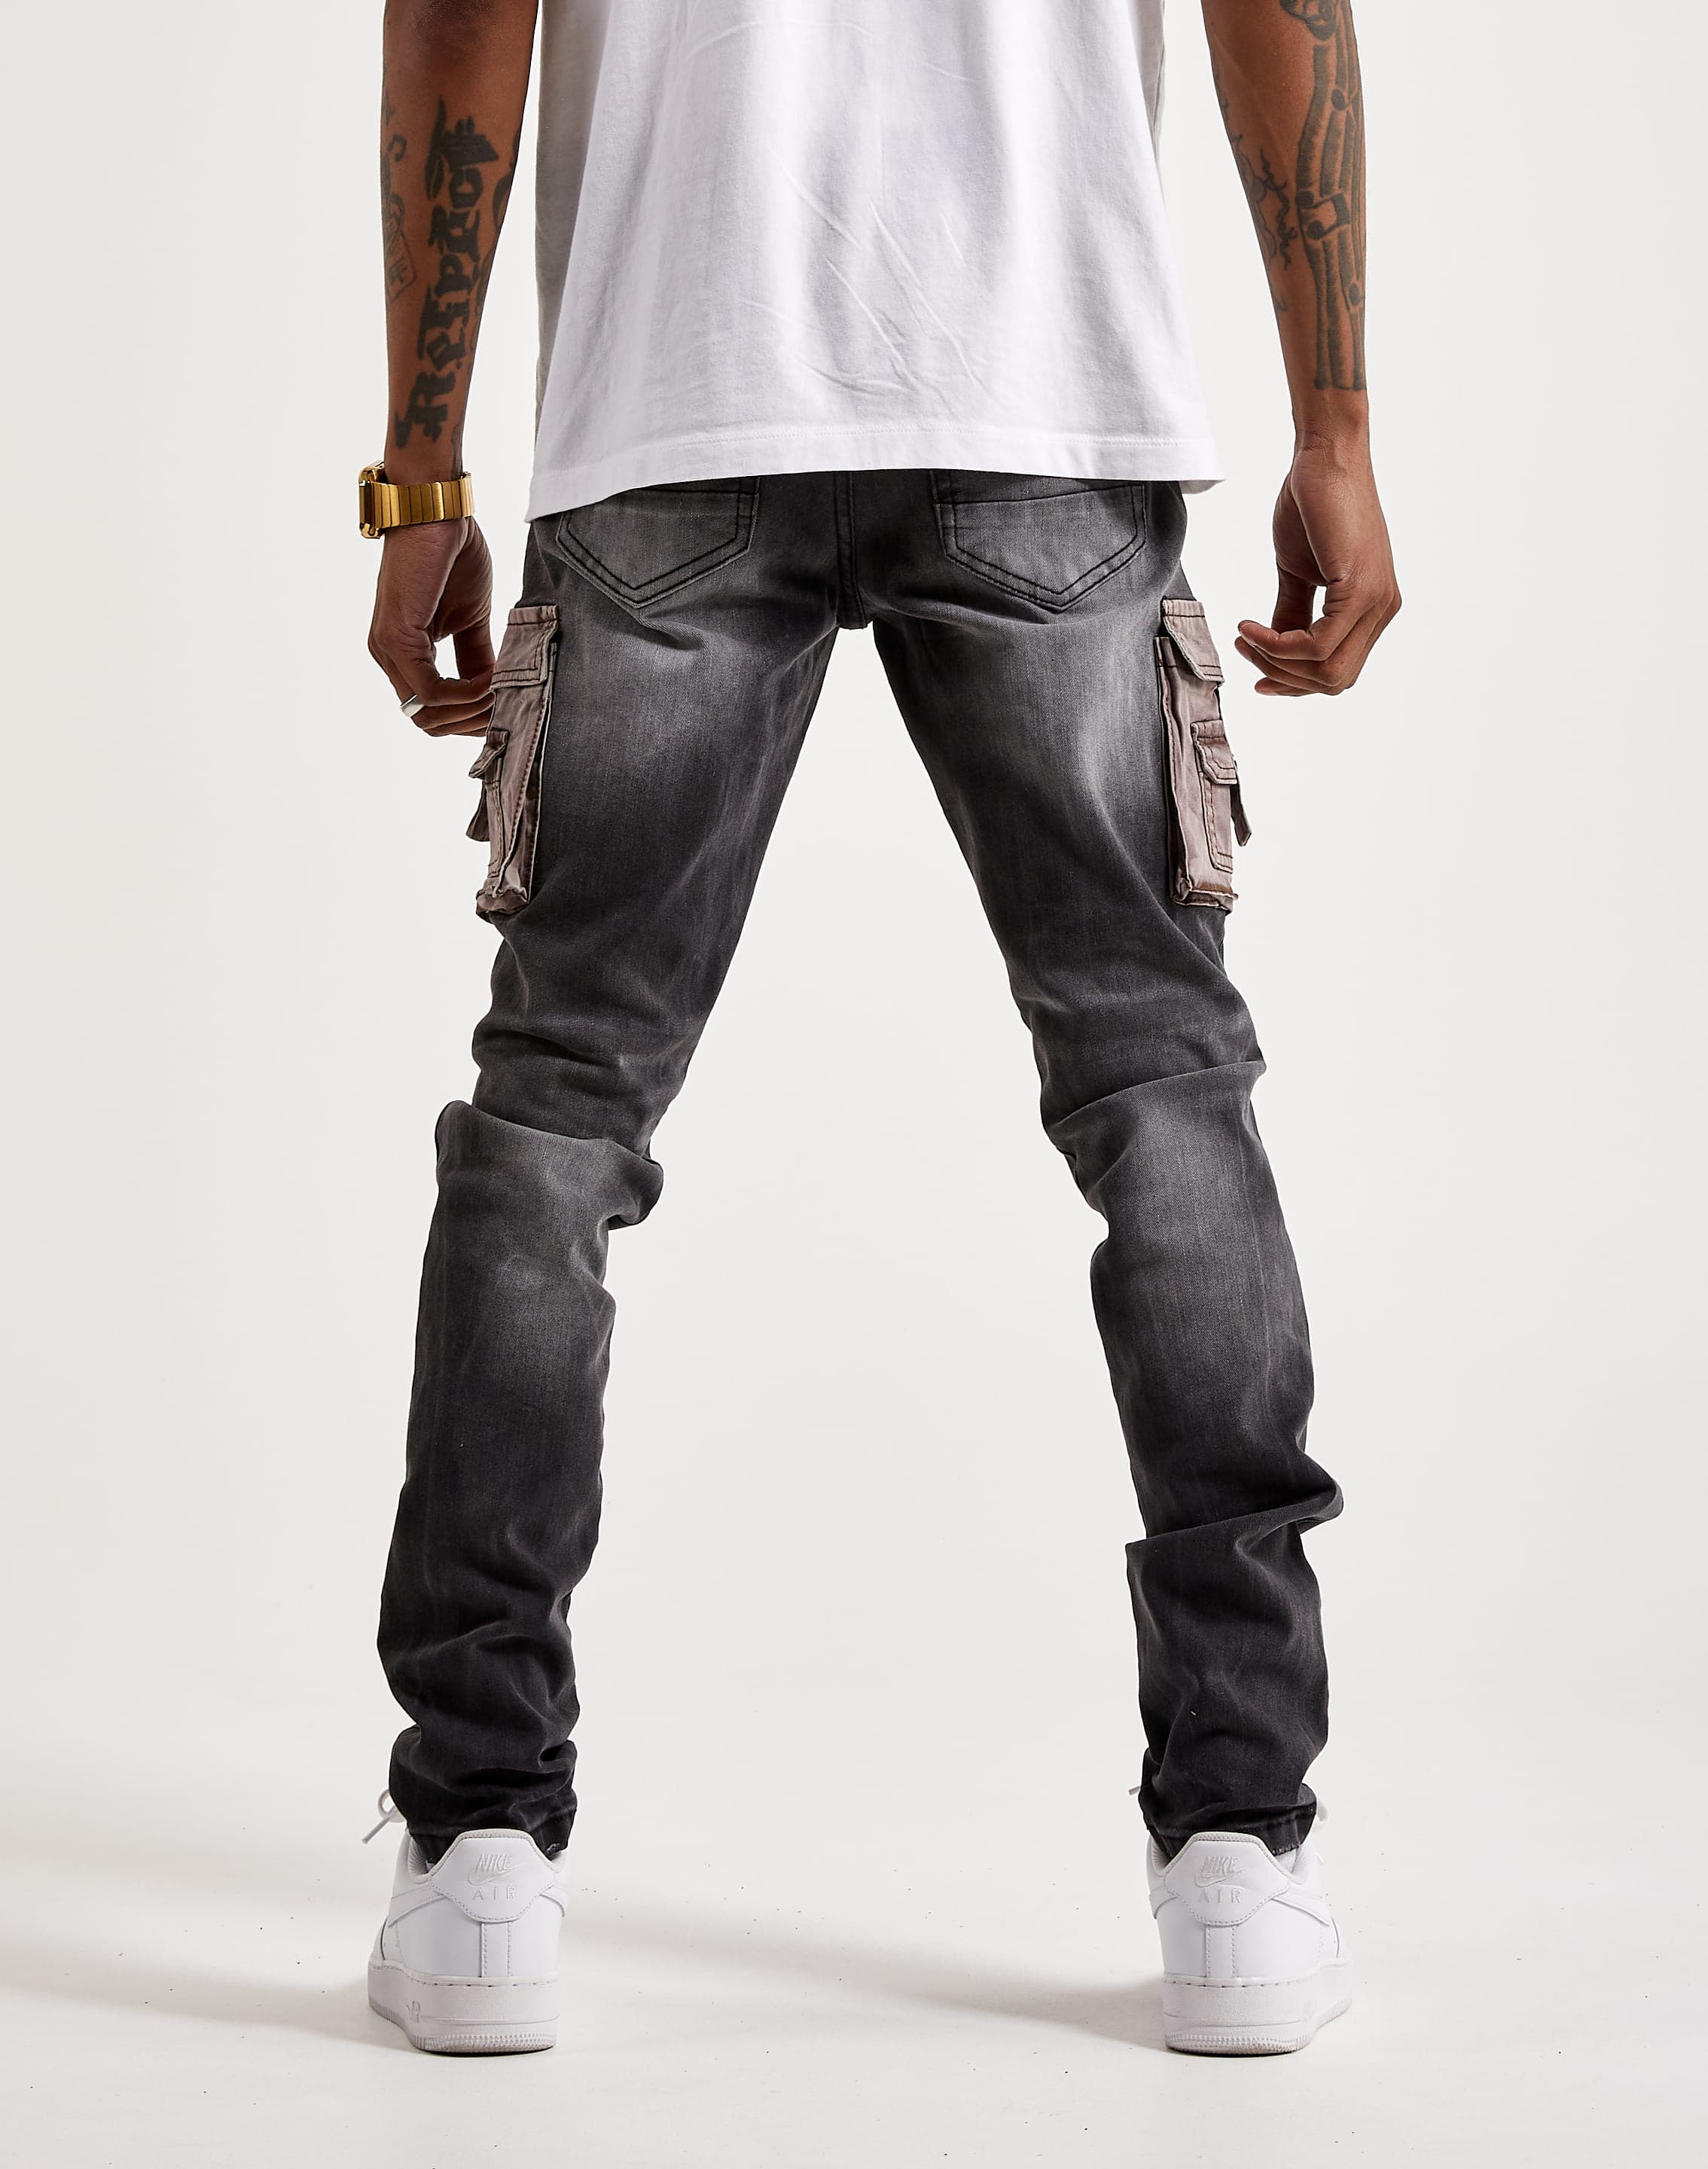 THE JEANS SHOP GH  cargo pants Size 6-16 180 cedis Order on